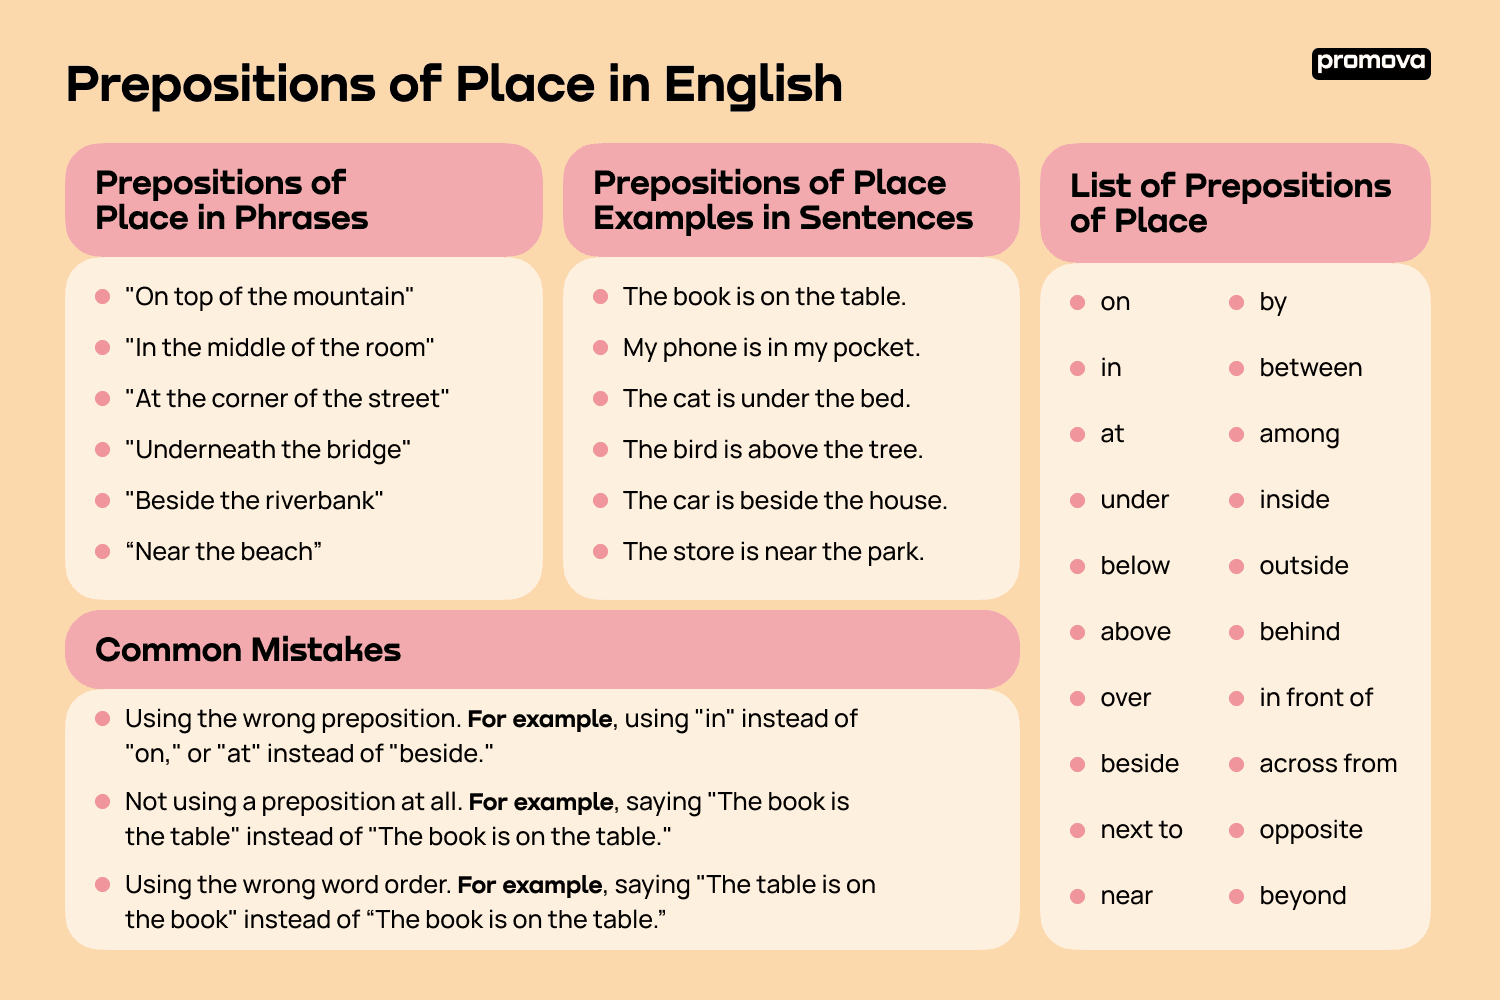 Prepositions of Place in English